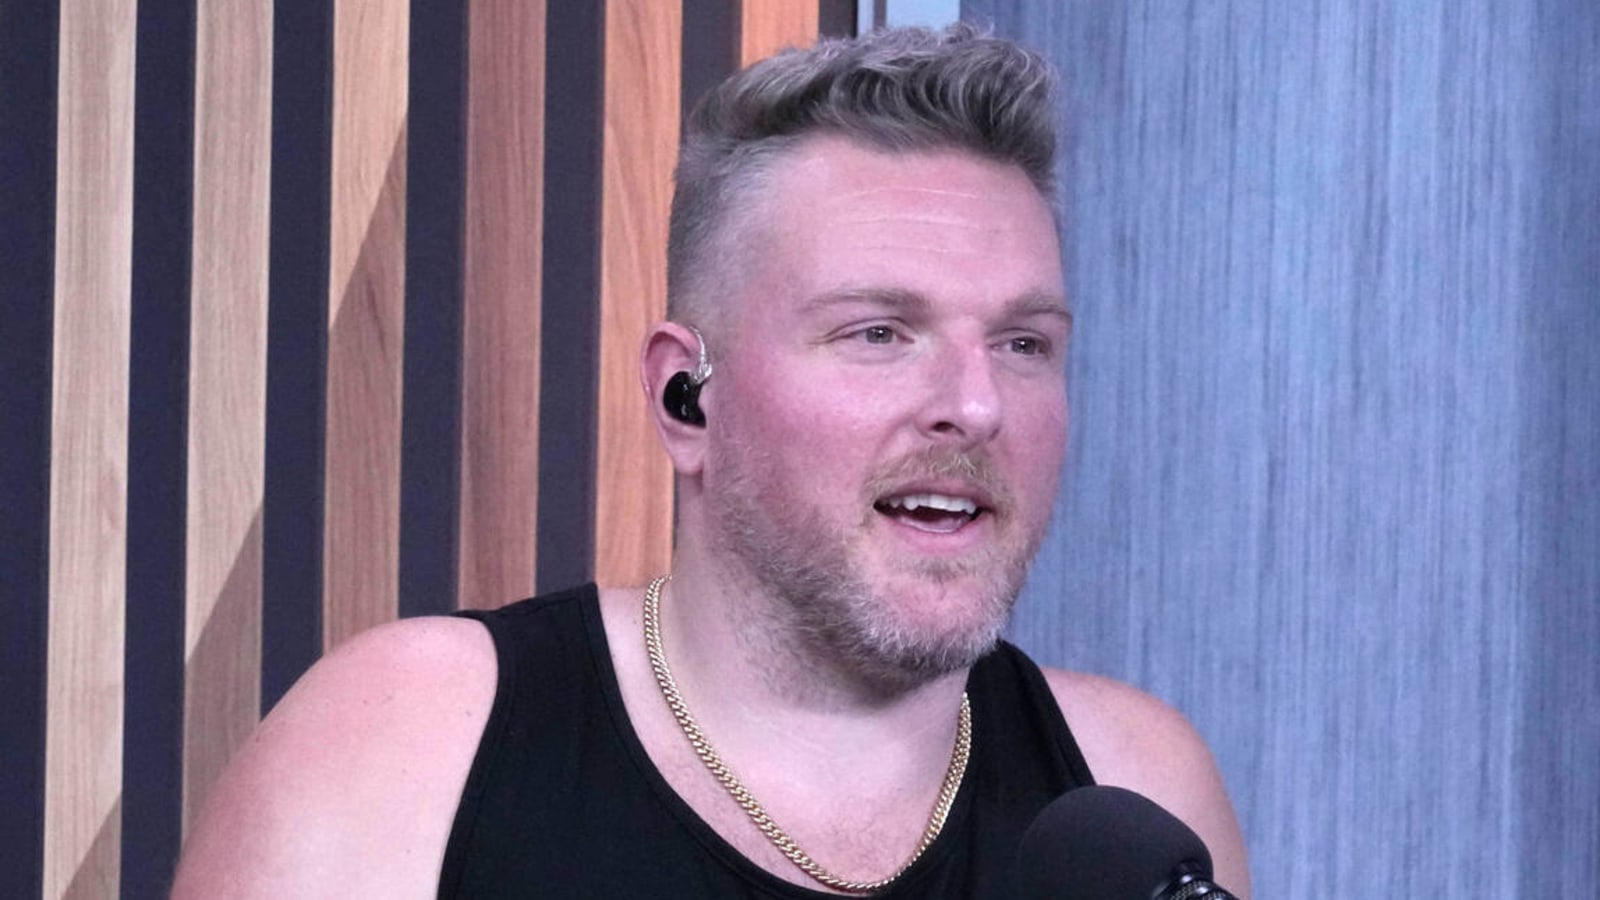 Pat McAfee could walk away from $120M FanDuel deal to join ESPN